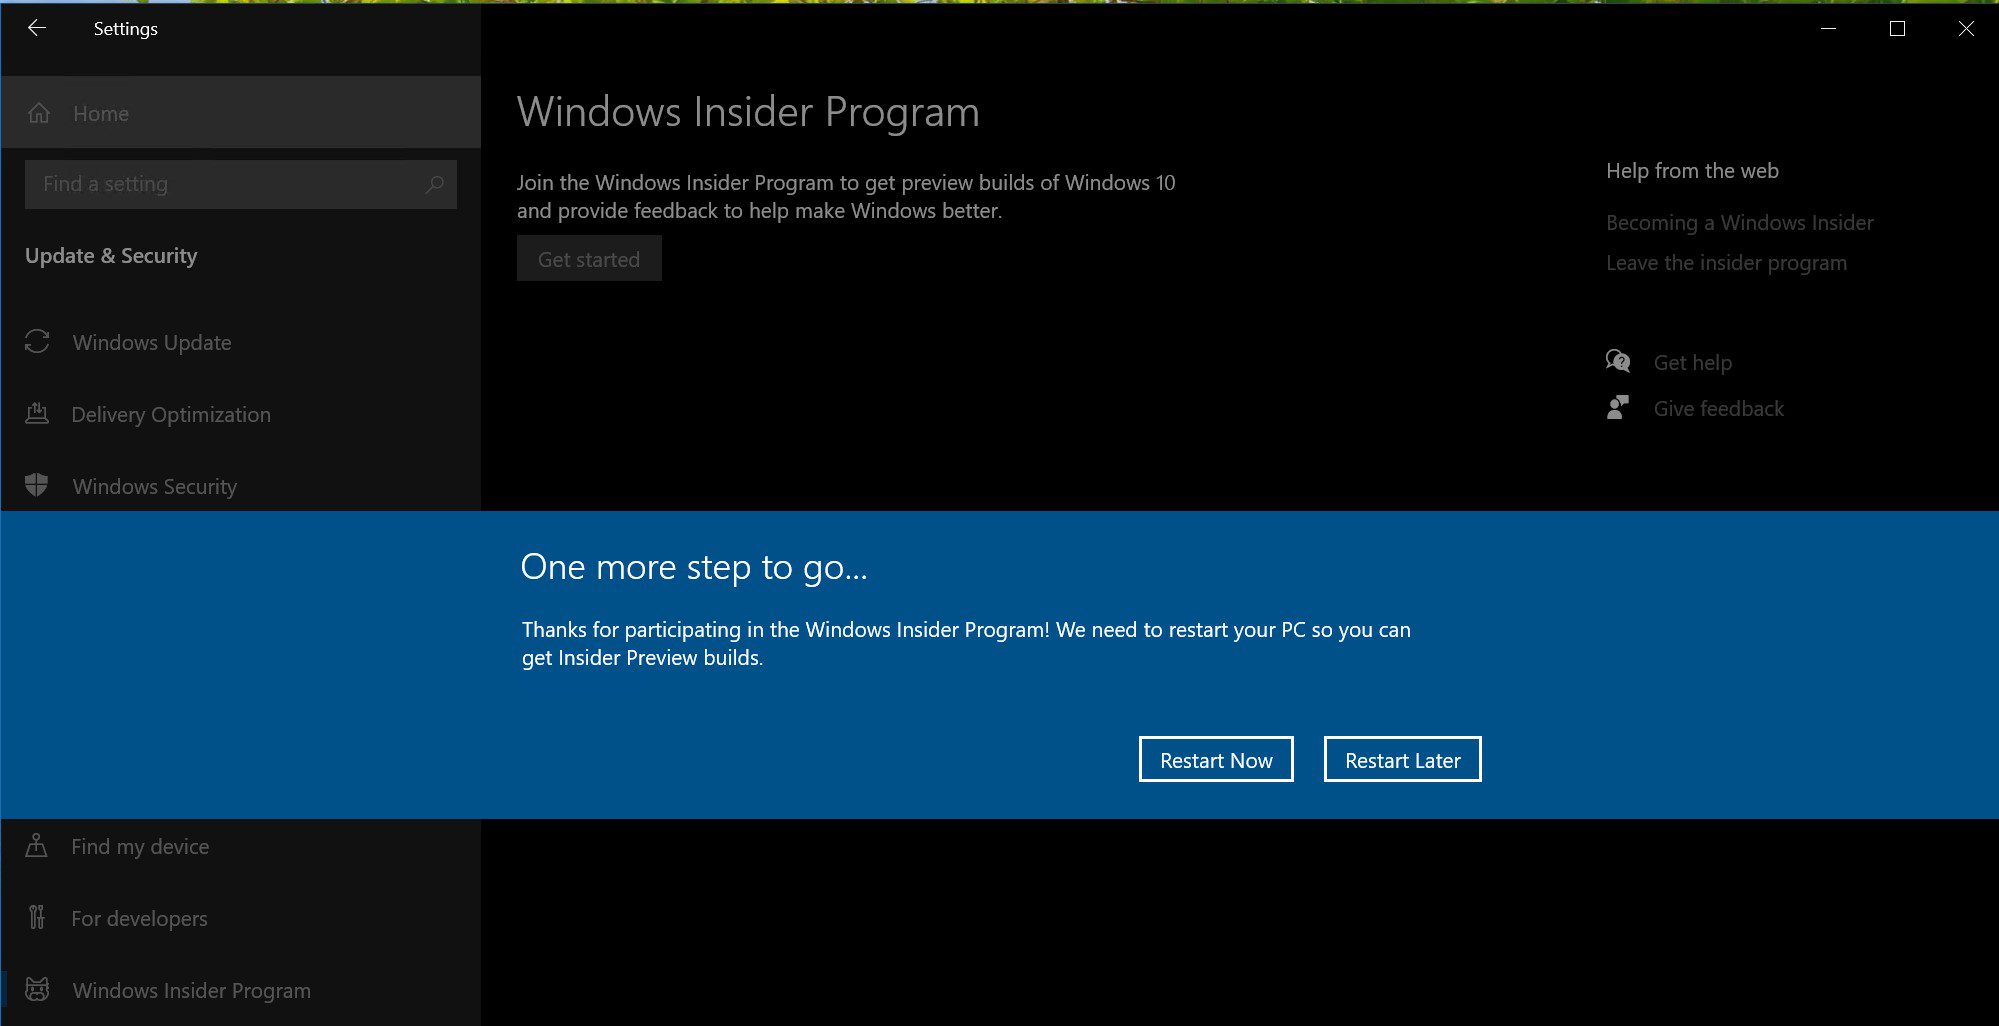 Need to reboot to get new Windows Insider builds